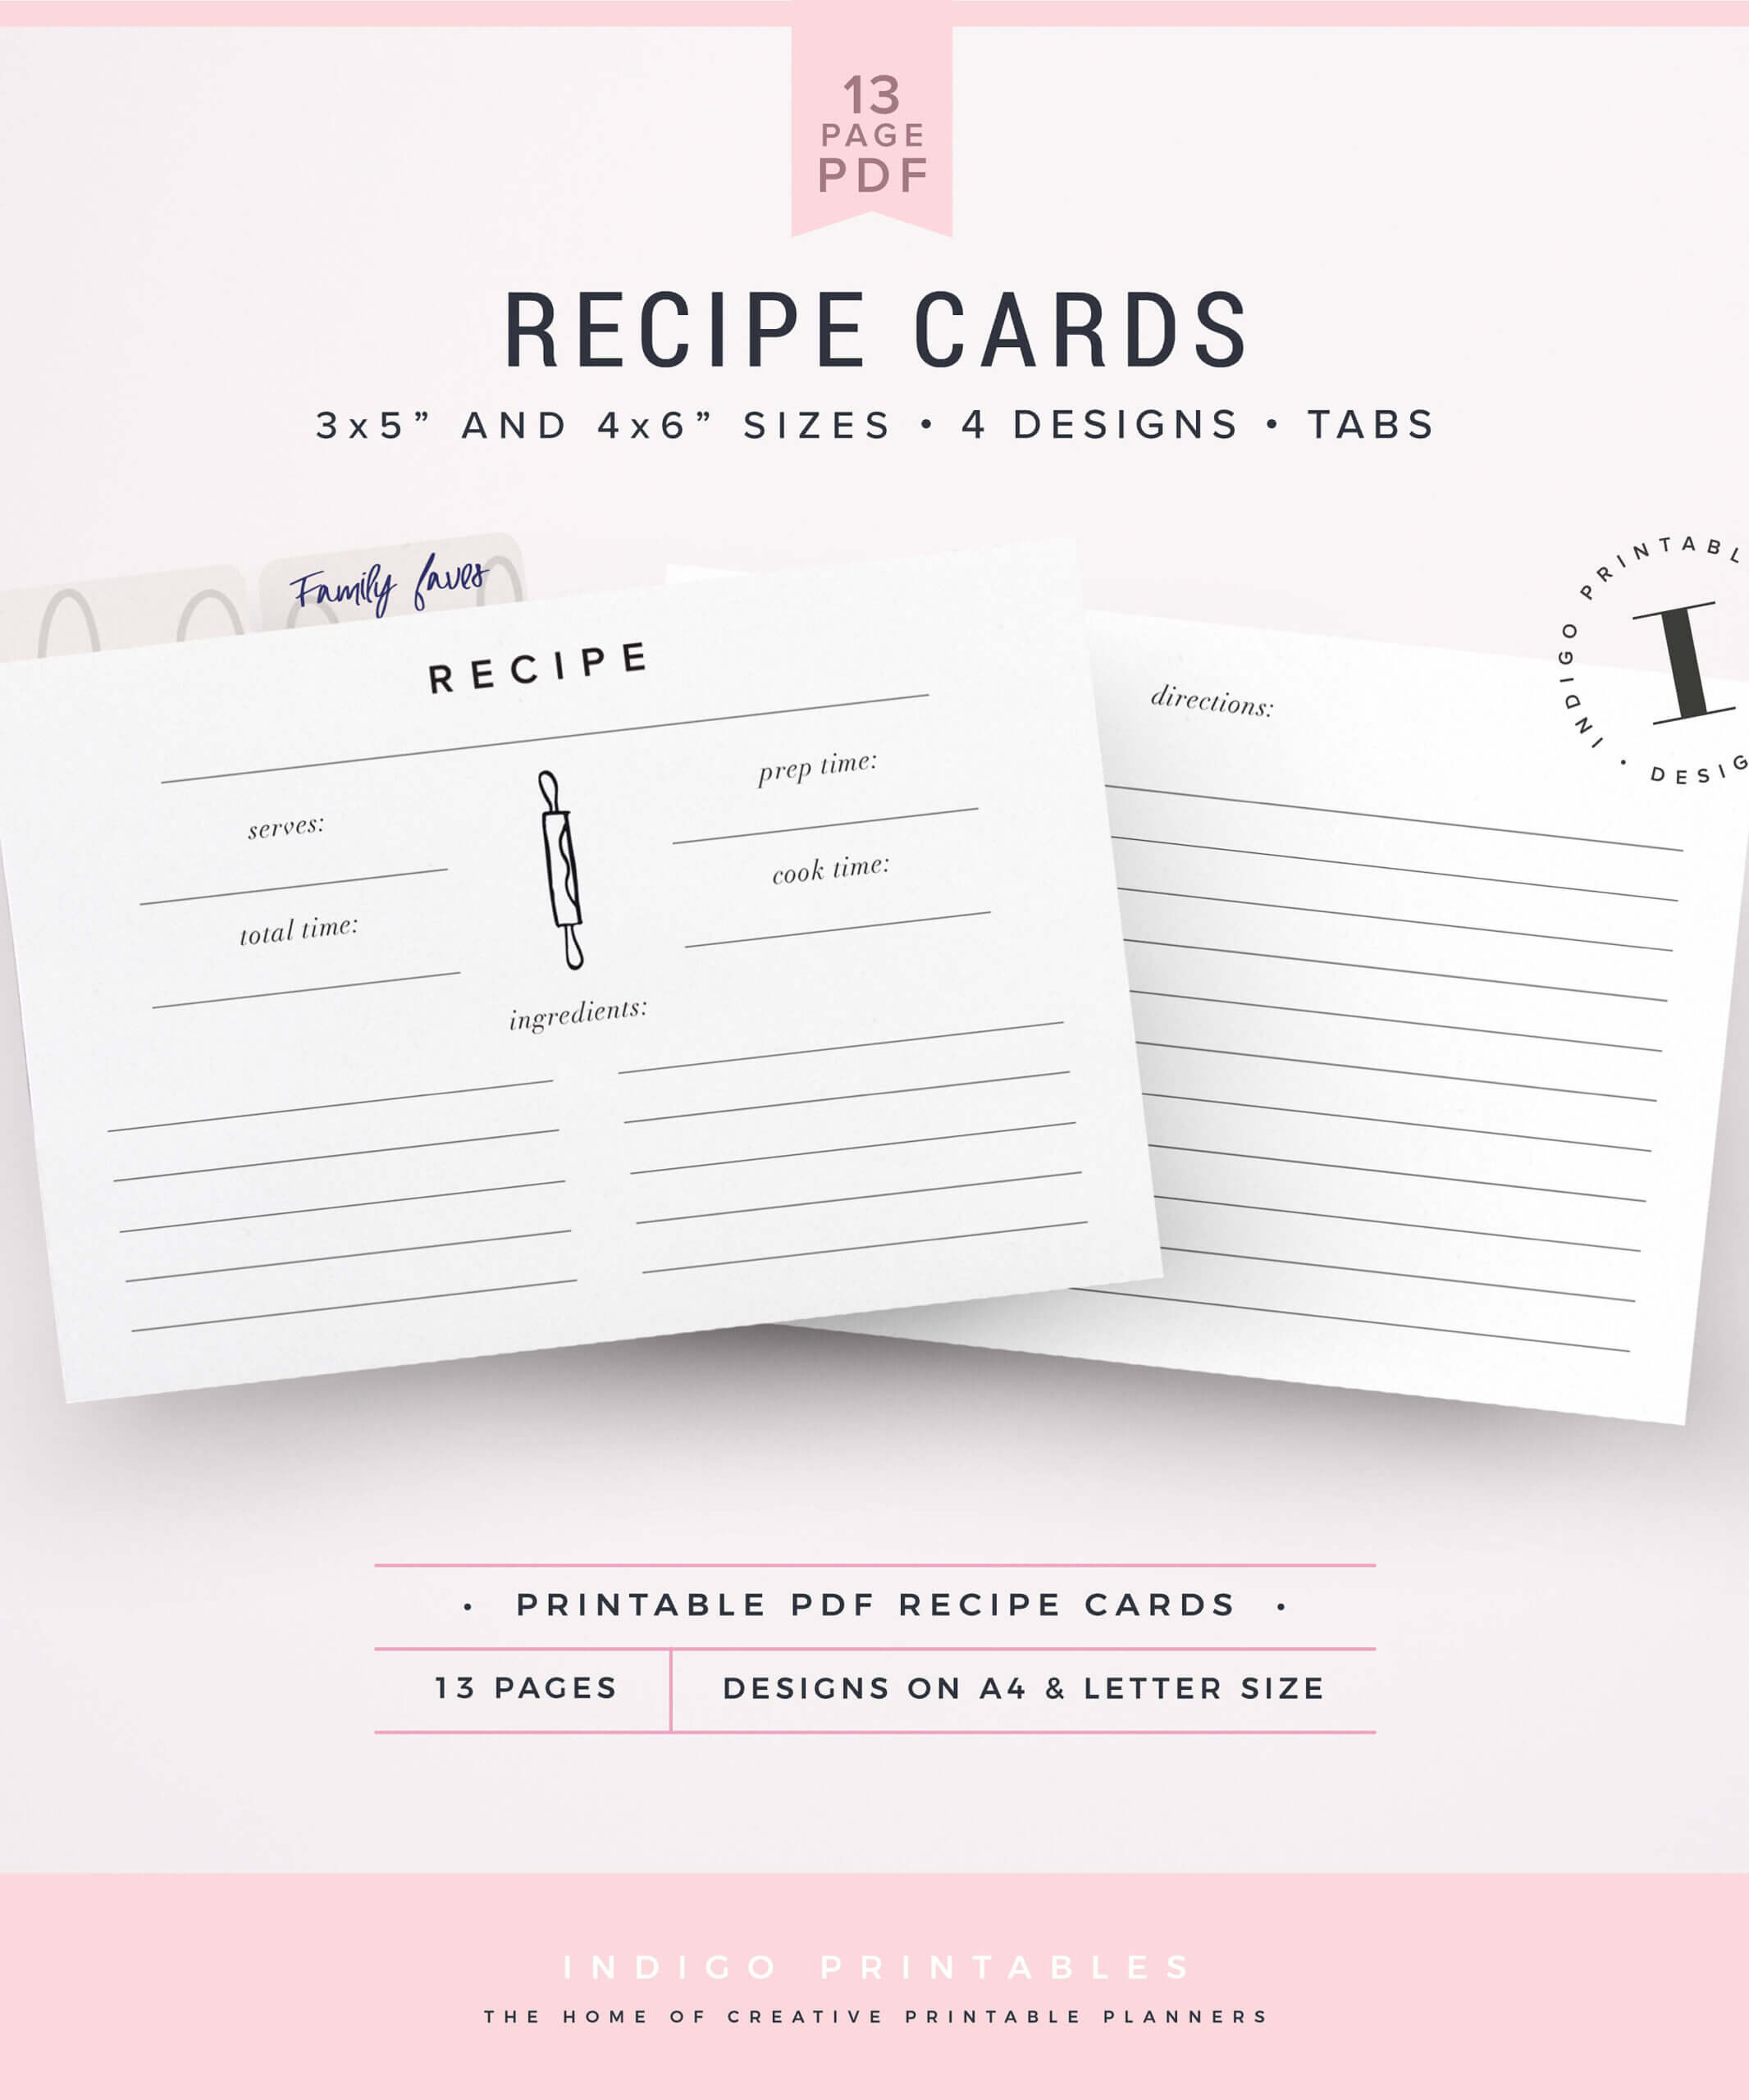 Recipe Cards, Printable Recipe Cards, Recipe Card Template, Index Card  Recipes, 3X5 Recipe Cards, 4X6 Recipe Cards, Recipe Card Tabs For Index Card Template For Pages